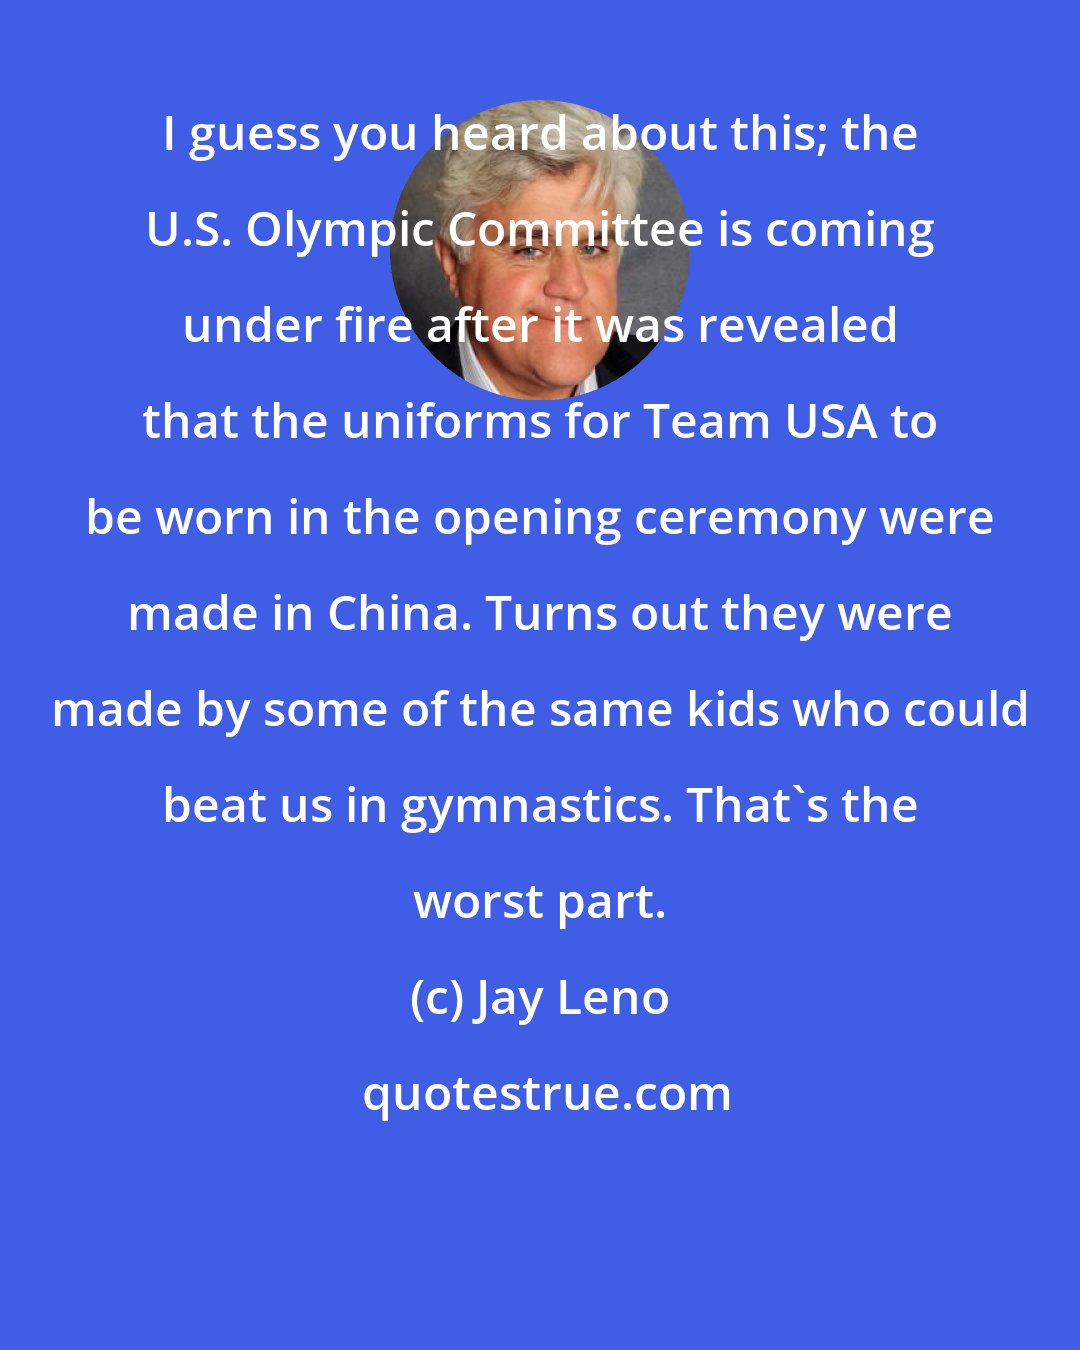 Jay Leno: I guess you heard about this; the U.S. Olympic Committee is coming under fire after it was revealed that the uniforms for Team USA to be worn in the opening ceremony were made in China. Turns out they were made by some of the same kids who could beat us in gymnastics. That's the worst part.